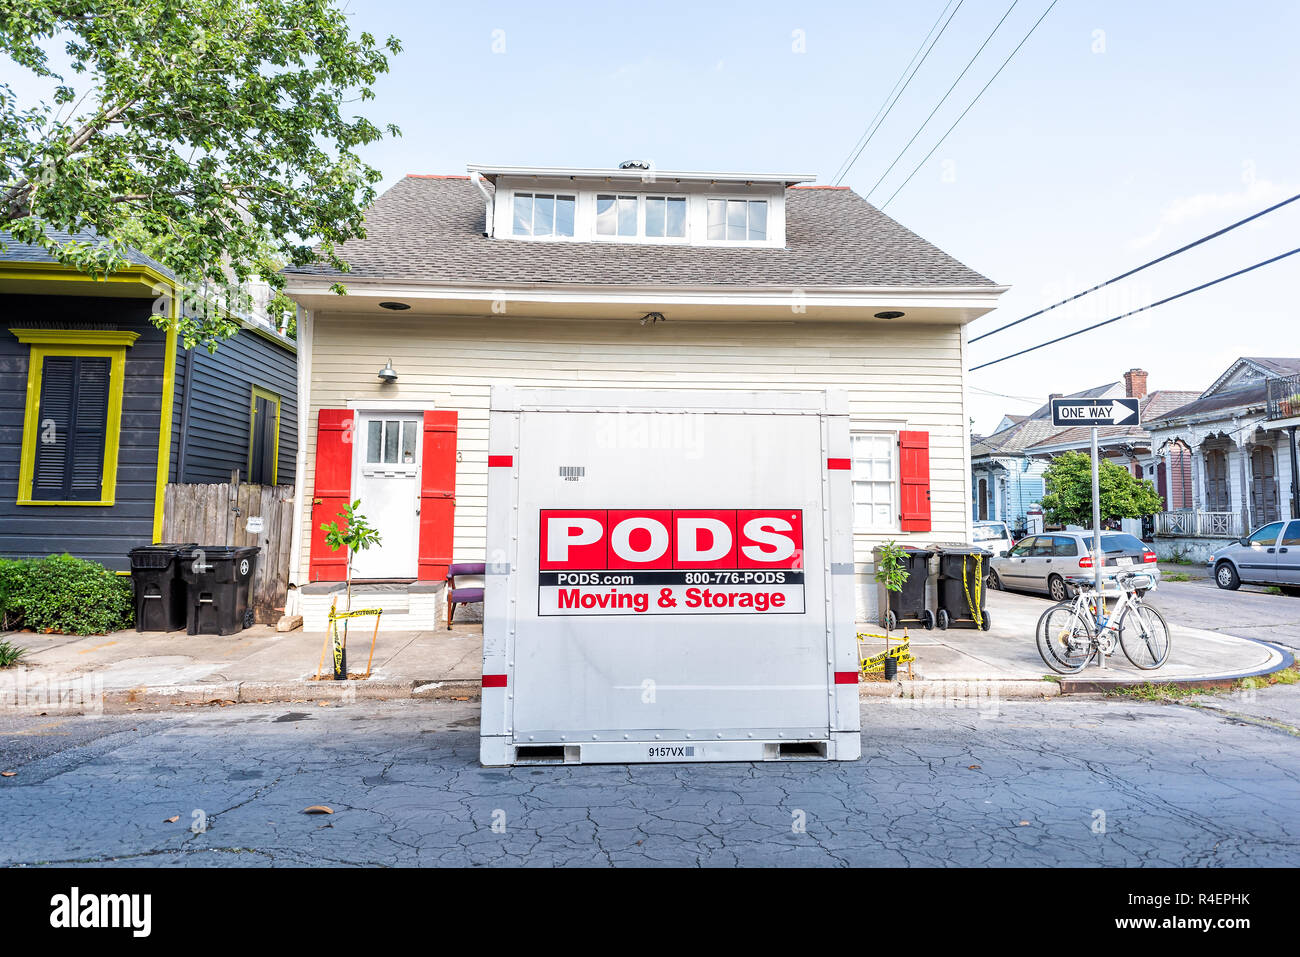 New Orleans, USA - April 23, 2018: Street historic Marigny neighborhood district in Louisiana town, city sidewalk, Pods storage container for moving o Stock Photo